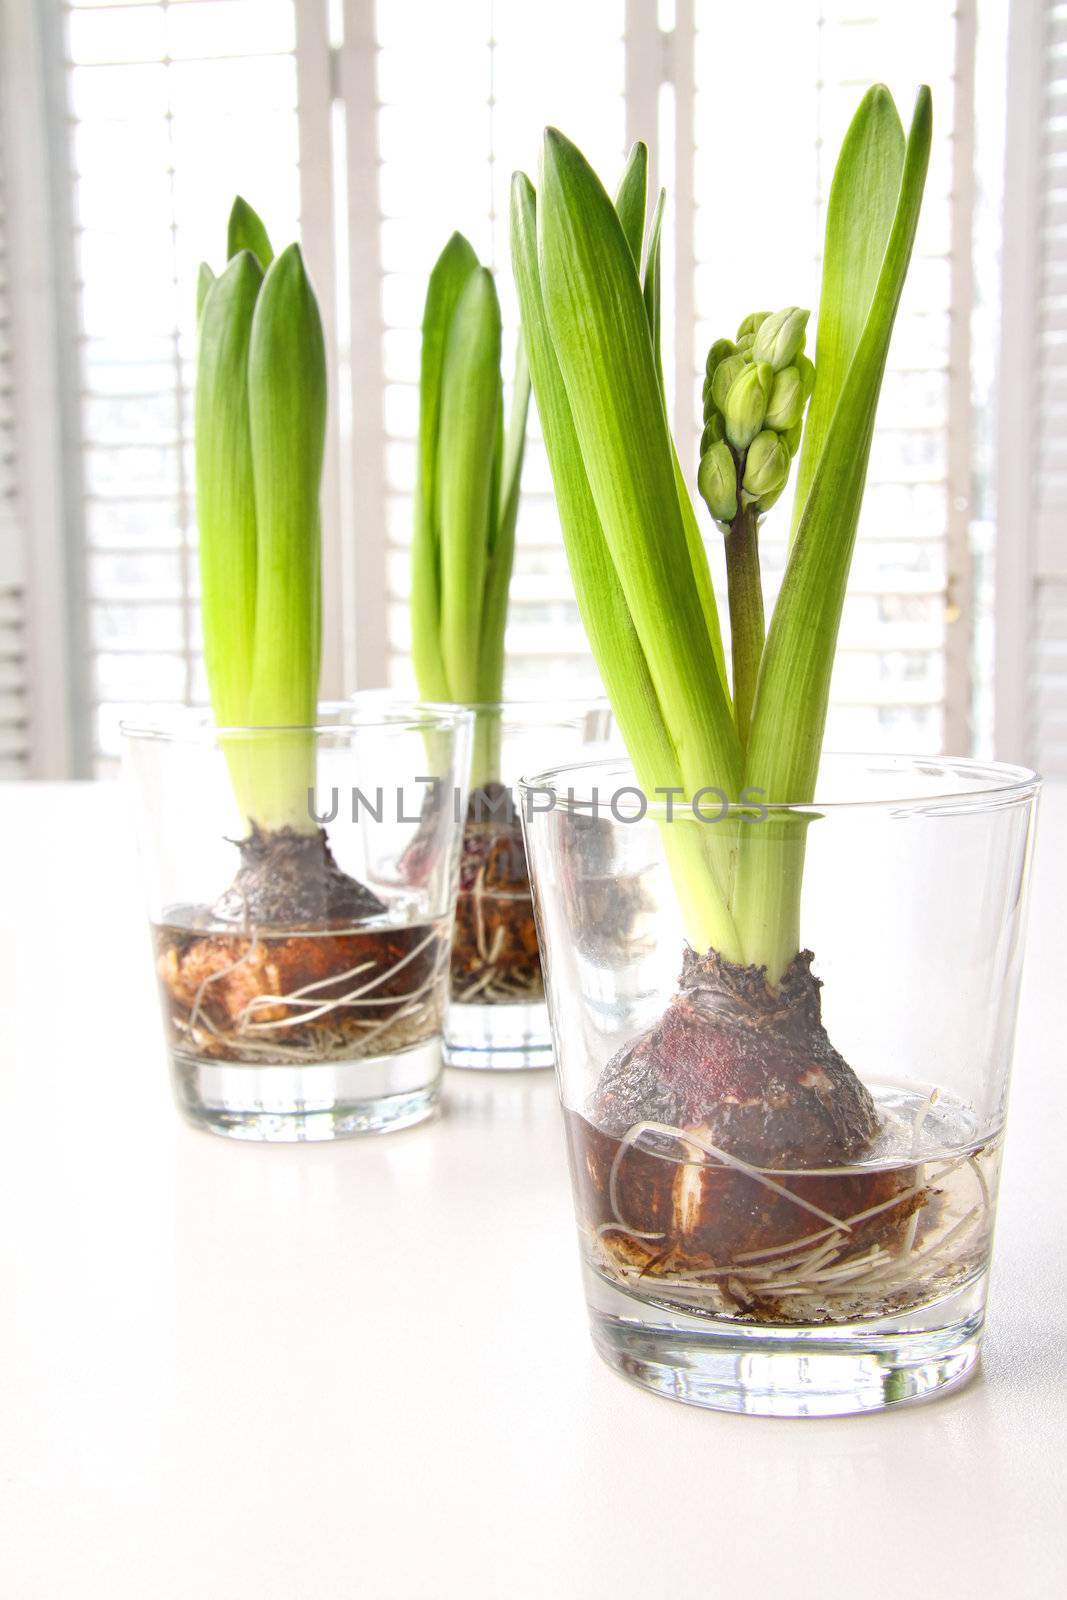 Spring hyacinth bulbs in glass containers on table